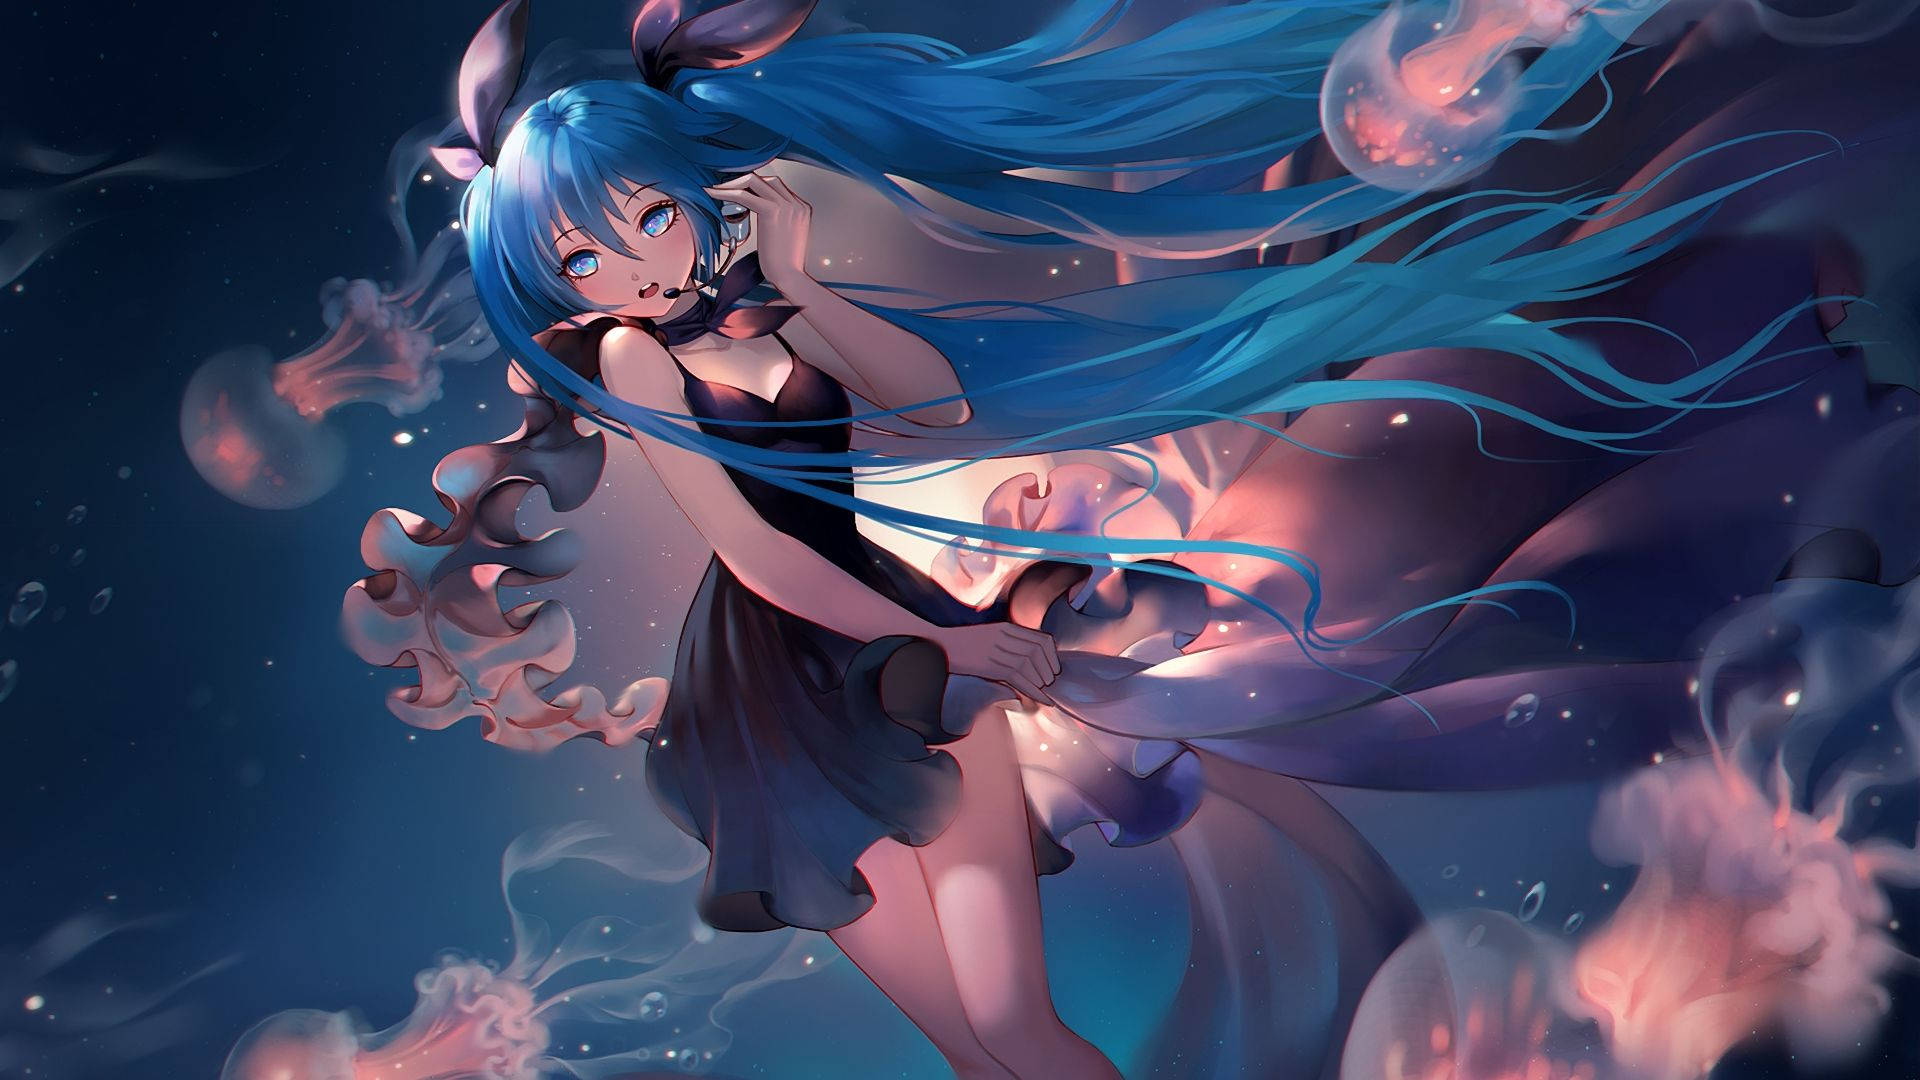 A Girl With Blue Hair And A Black Dress